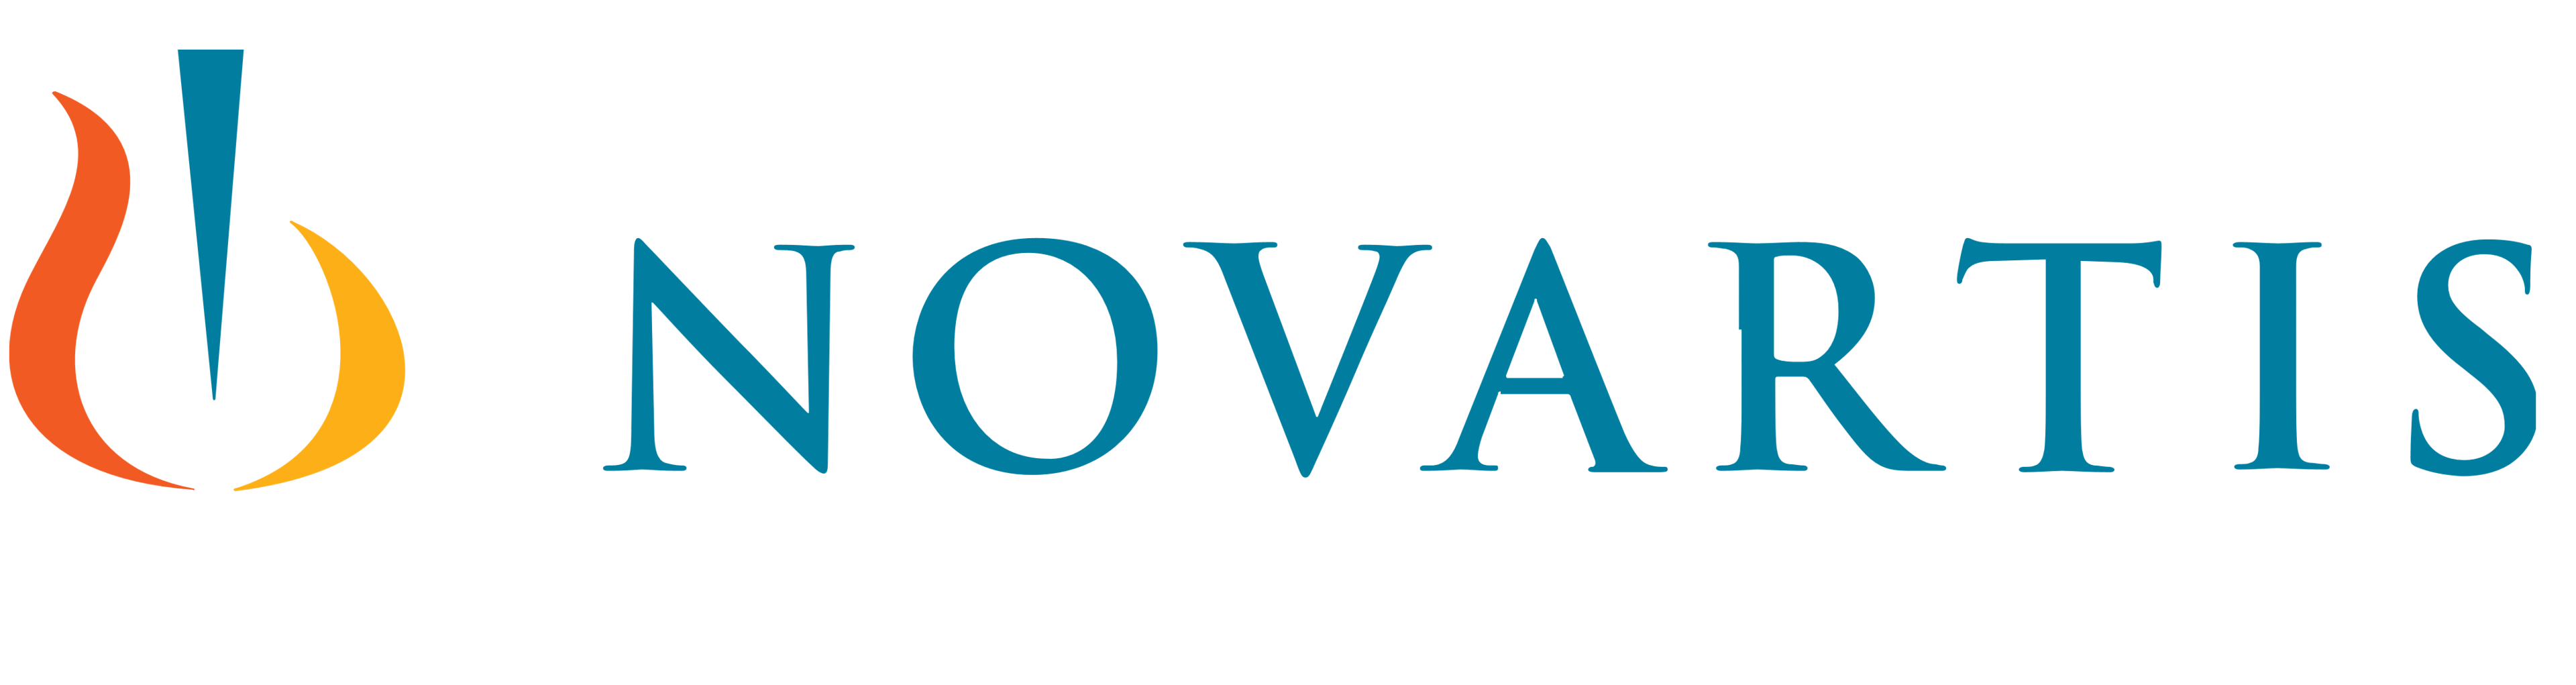 Novartis is reportedly reconsidering pushing for approval of their experimental COVID-19 treatment, ensovibep, after the US Food and Drug Administration (FDA) indicated needing more research. Novartis originally filed for FDA approval of their antiviral candidate in early February 2022, following a mid-stage trial demonstrating a single injection of ensovibep significantly reduced COVID-19 hospitalization and death. Novartis and Molecular Partners, a Swiss drug company that originally developed ensovibep, paid $22 million last year for the option to in-license the COVID-19 therapy.  Company executives are currently in conversation with the FDA to determine the kind of late-stage research required for ensovibep’s emergency authorization. Ensovibep is a Designated Ankyrin Repeat Protein (DARPin) that hinders the SARS-CoV-2 virus from entering cells. With protein scaffolds much smaller than monoclonal antibodies, ensovibep binds to 3 parts of the virus’s receptor-binding domain.  Novartis and Molecular Partners joined forces in October 2020, back when there were few to no COVID-19 prevention or treatment options. Today, vaccines are widely available and there are many promising treatments.  Ensovibep will certainly face delays in FDA approval, and may even opt to abandon the project. Novartis is deciding whether to continue pushing for FDA authorization “in light of waning rates of COVID around the world,” said CEO Vas Narasimhan.  Ensovibep previously neglected to clear the efficacy requirements in the National Institutes of Health (NIH) ACTIV-3 trial. The therapy failed a planned futility analysis, leading the NIH to stop enrollment in the ACTIV-3 sub-study. Novartis emphasized that the prospect of a single injection for COVID-19 treatment is still exciting to the FDA. Ensovibep has maintained its efficacy against all major variants of concern, including Omicron. “Certainly, we believe in the profile of the molecule,” Narasimhan said.